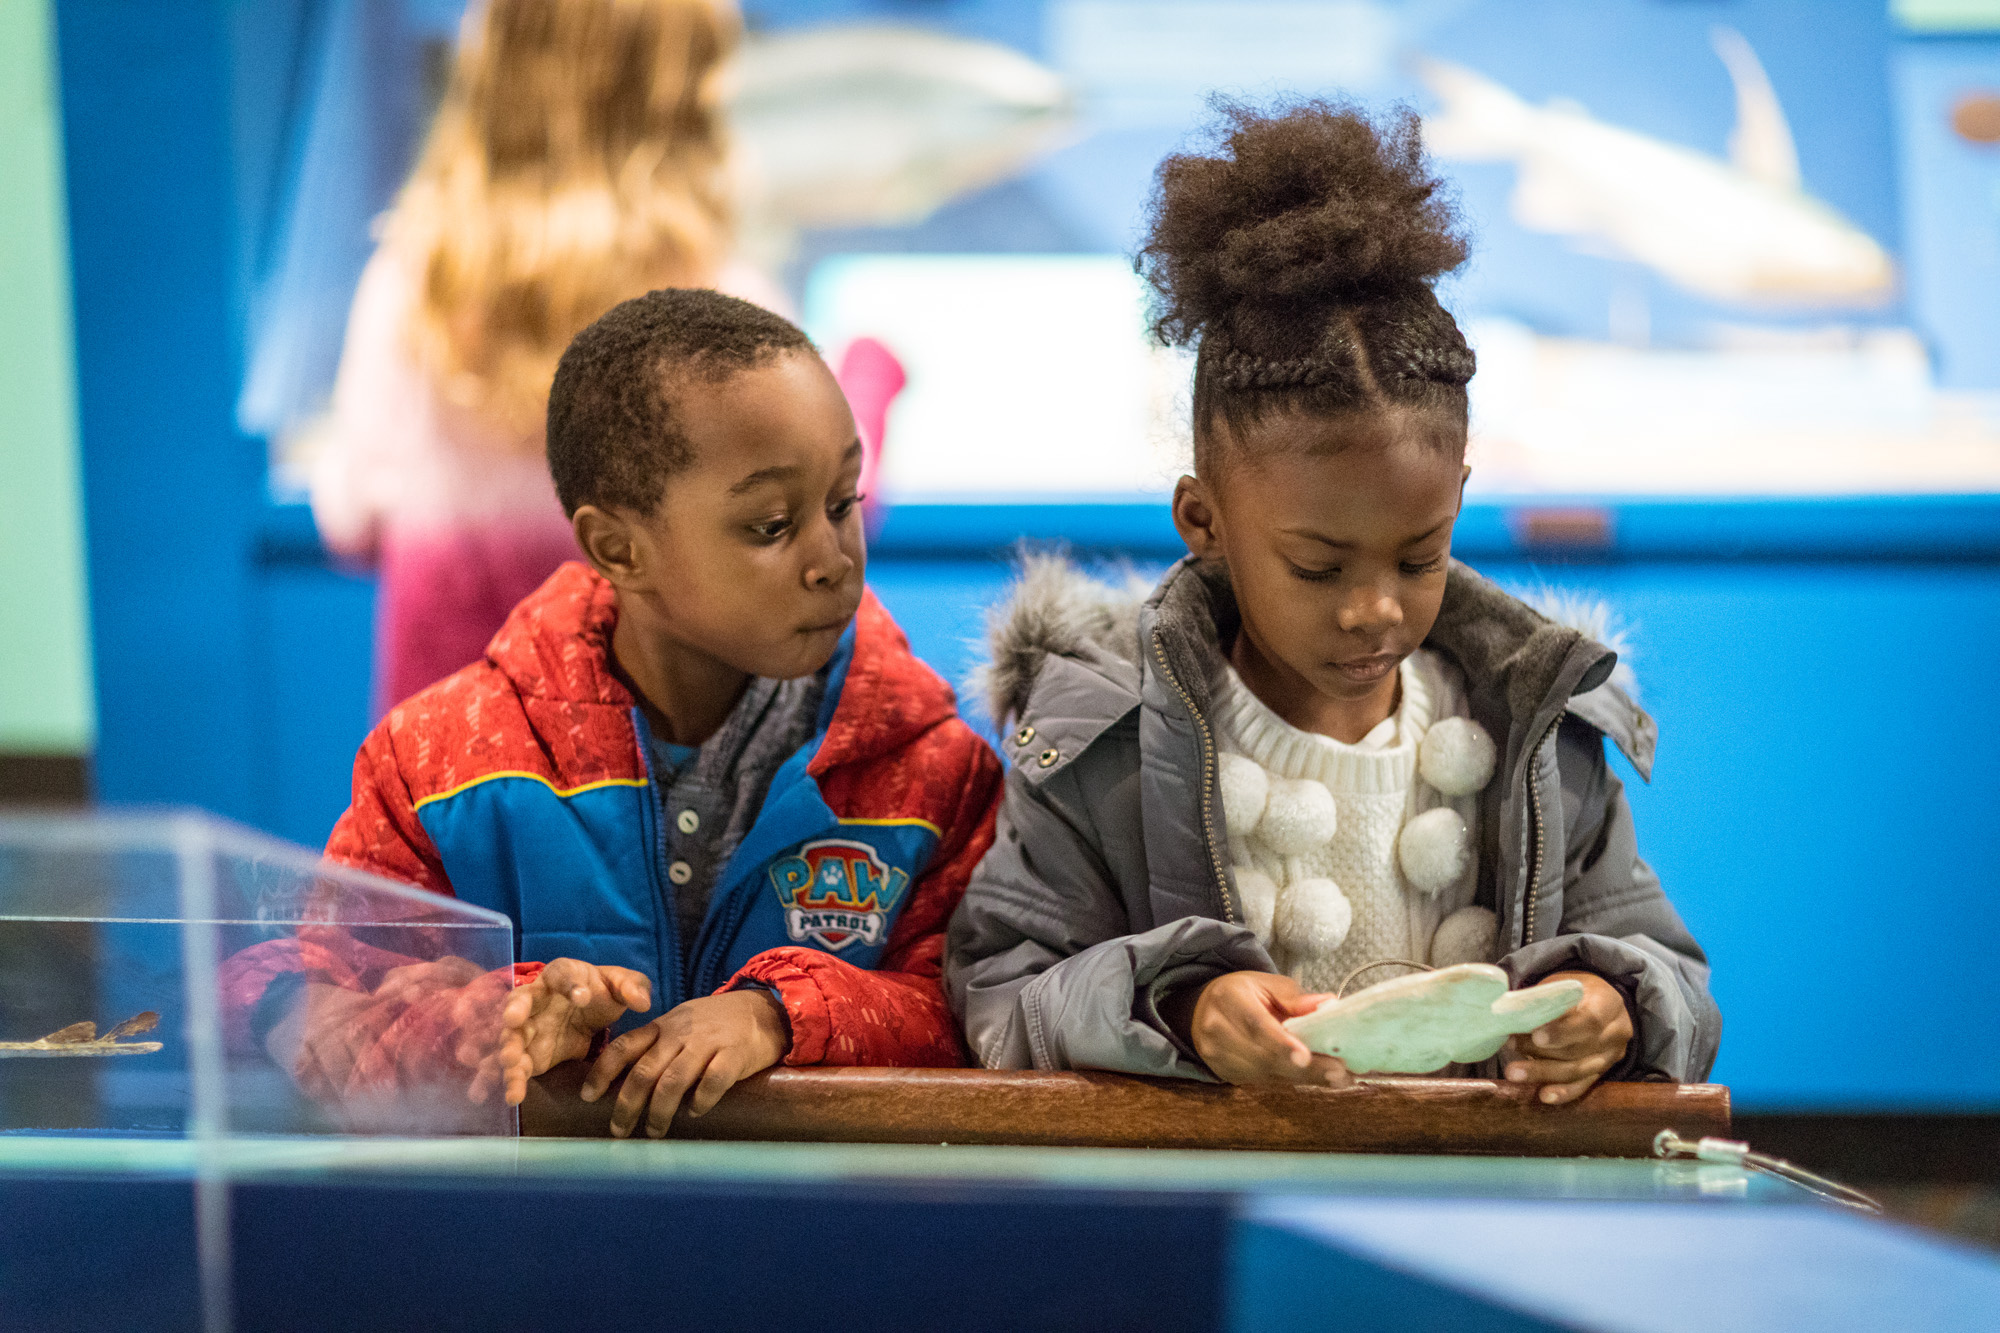 Two children play with objects in an exhibition. A young girl on the right inspects the replica fossil that she holds with both of her hands. The young boy to her left looks over her shoulder to also wonder at the object.